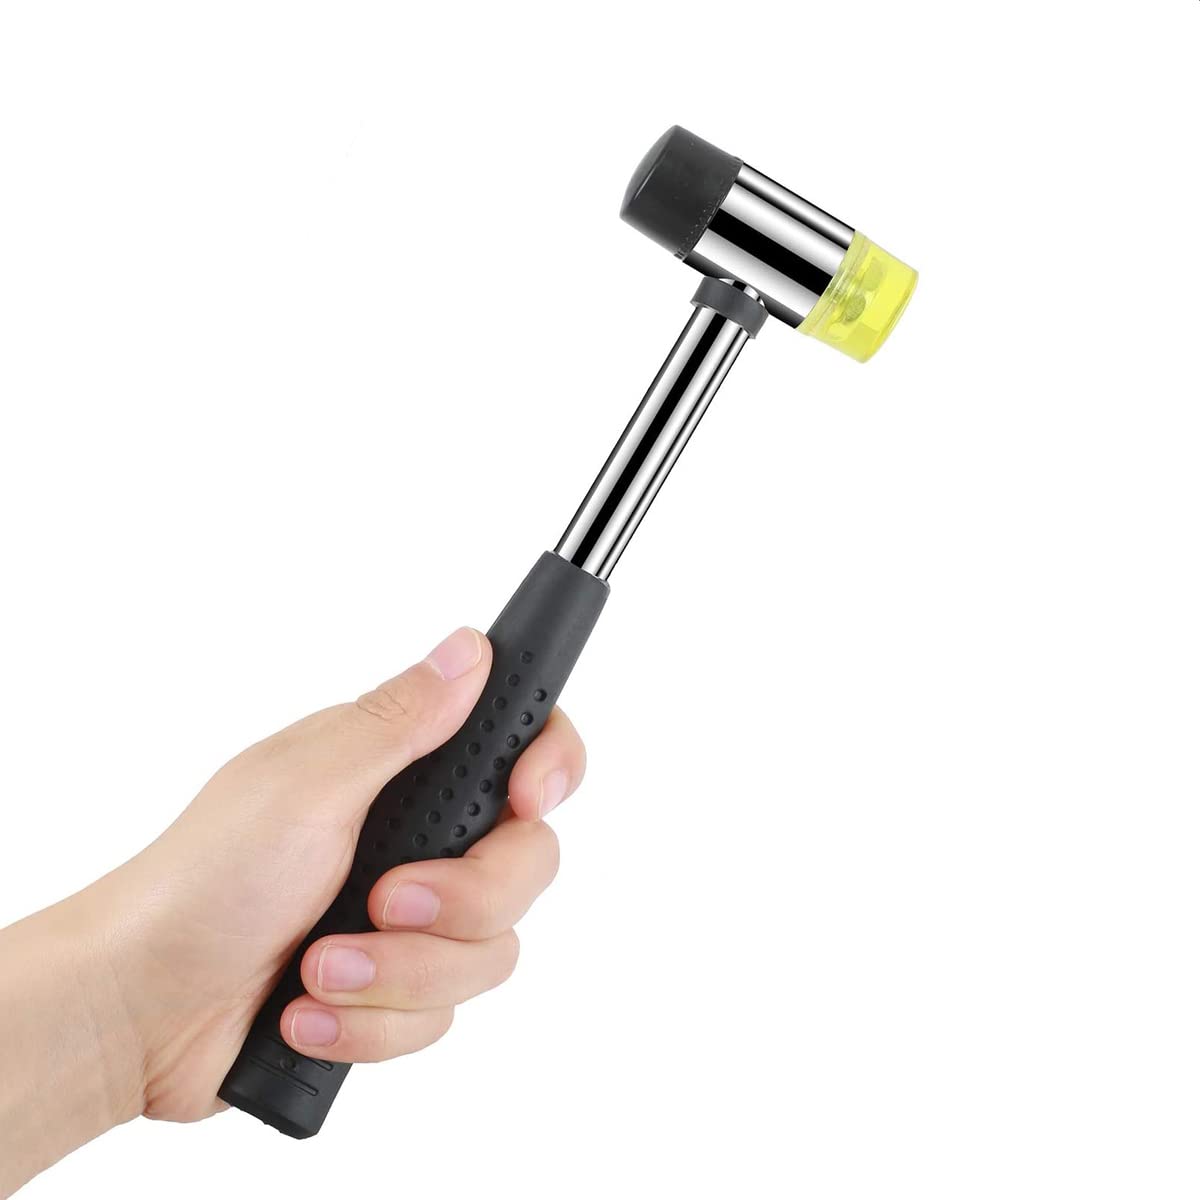 Rubber Mallet, Small